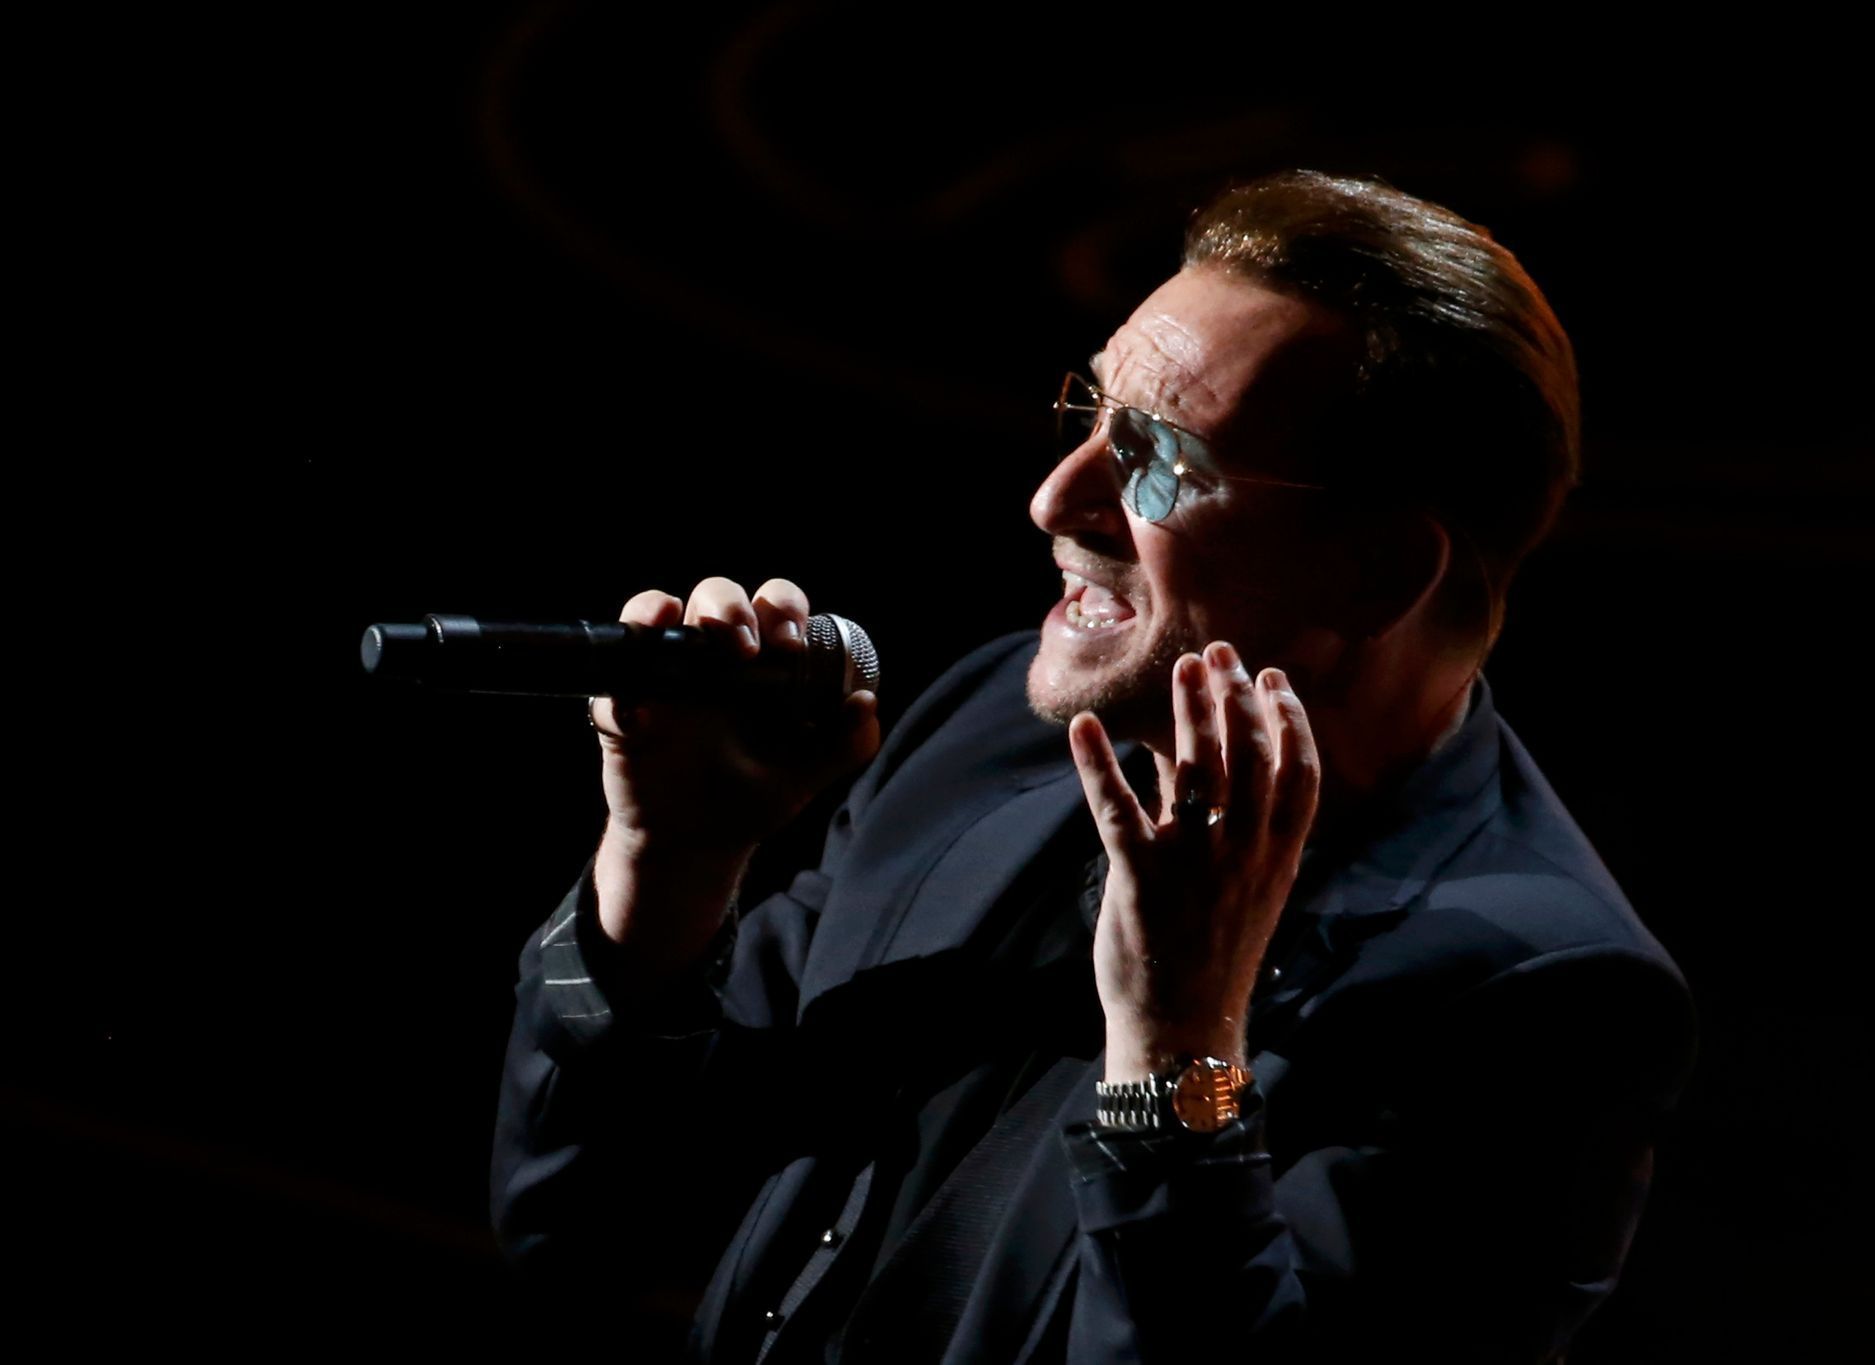 Lead singer Bono of the Irish rock band U2 performs &quot;Ordinary Love&quot; from the film &quot;Mandela: Long Walk to Freedom&quot; at the 86th Academy Awards in Hollywood